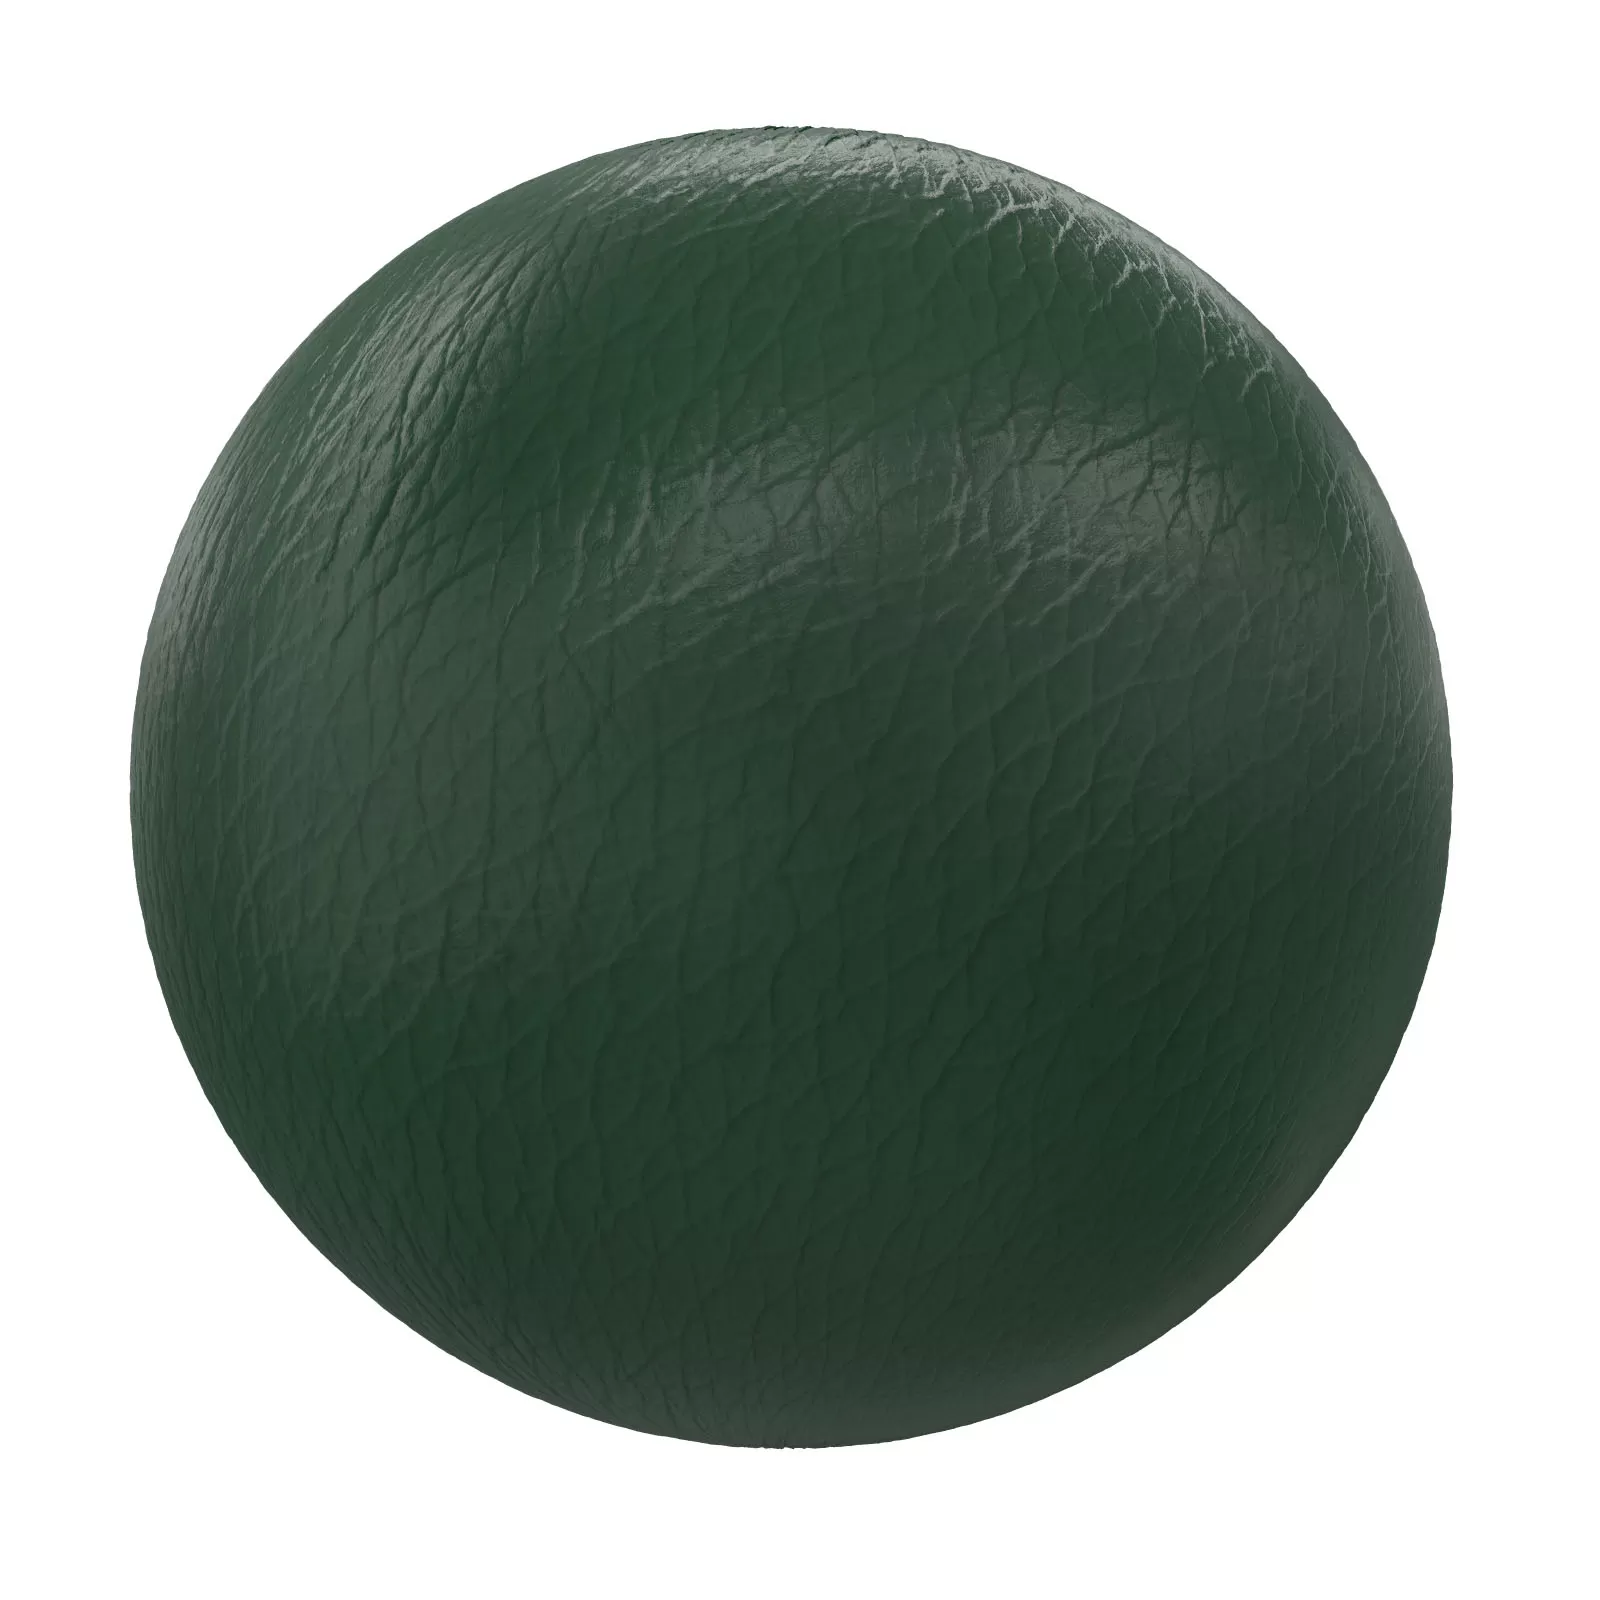 PBR CGAXIS TEXTURES – LEATHER – Green Leather 3